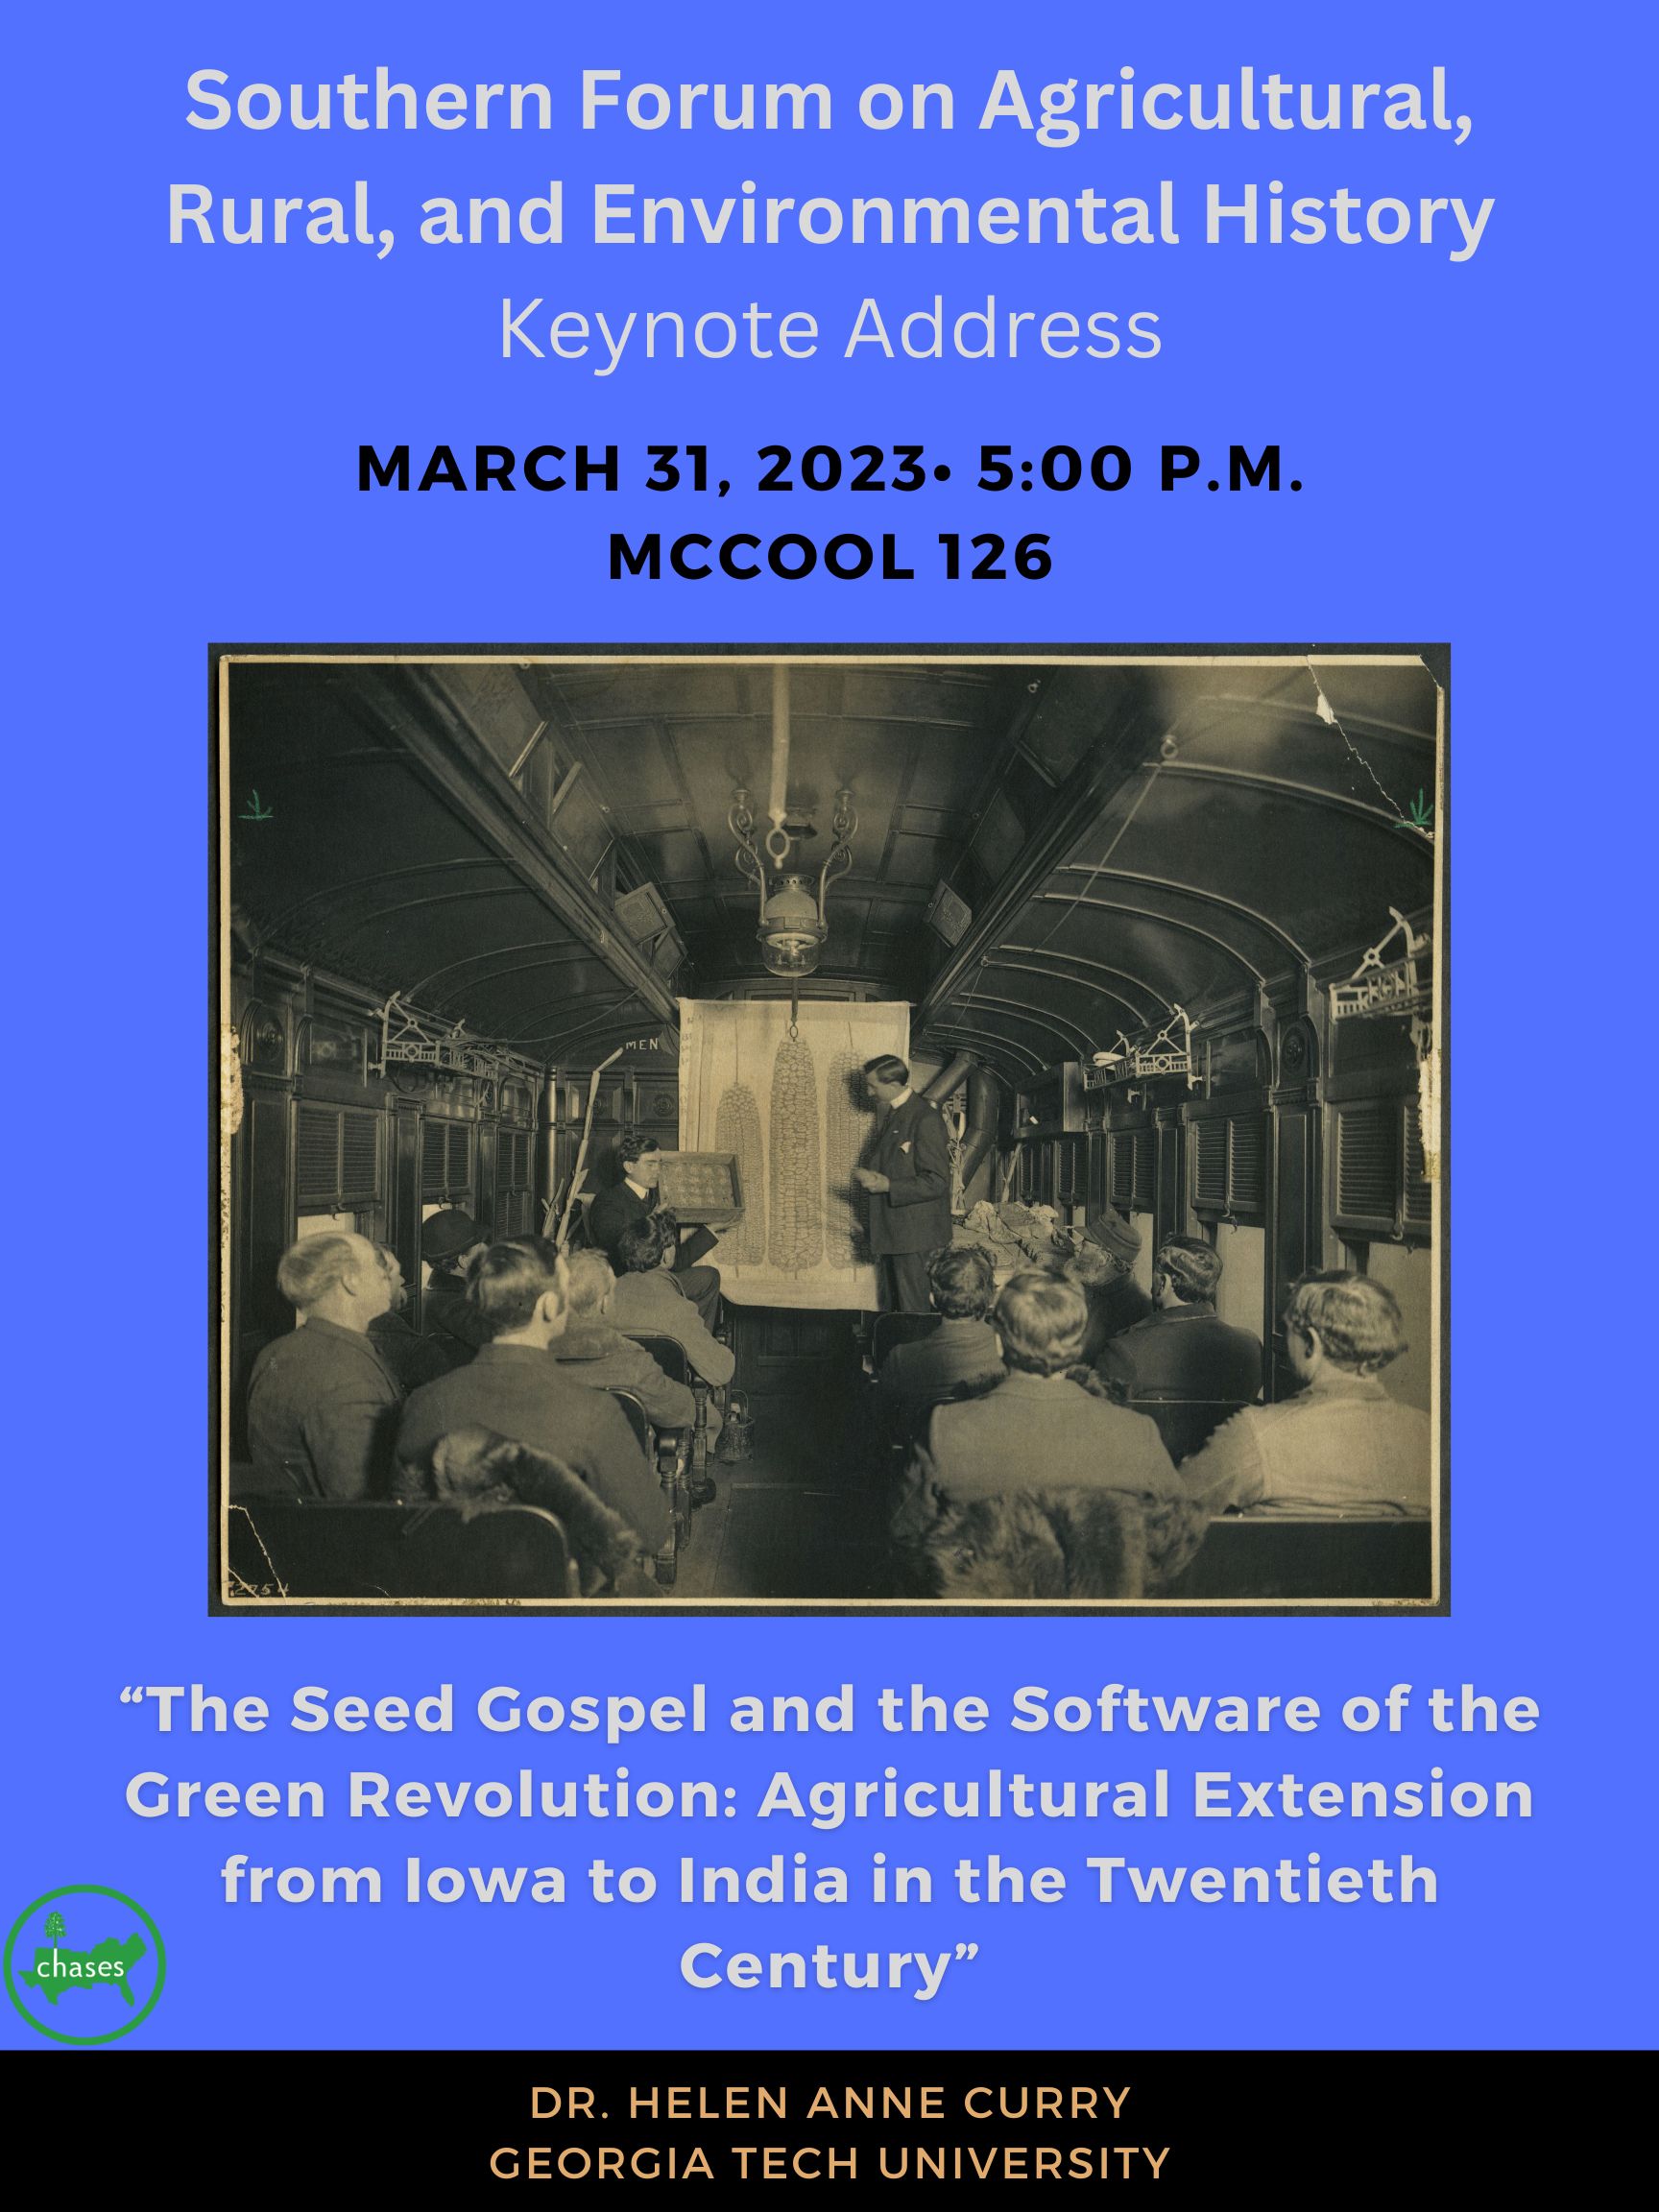 CHASES Sponsors SFARE Keynote Presentation: “The Seed Gospel and the Software of the Green Revolution: Agricultural Extension from Iowa to India in the Twentieth Century” By Dr. Helen Anne Curry. Friday, March 31, 2023 at 5 pm at McCool Hall Room 126.